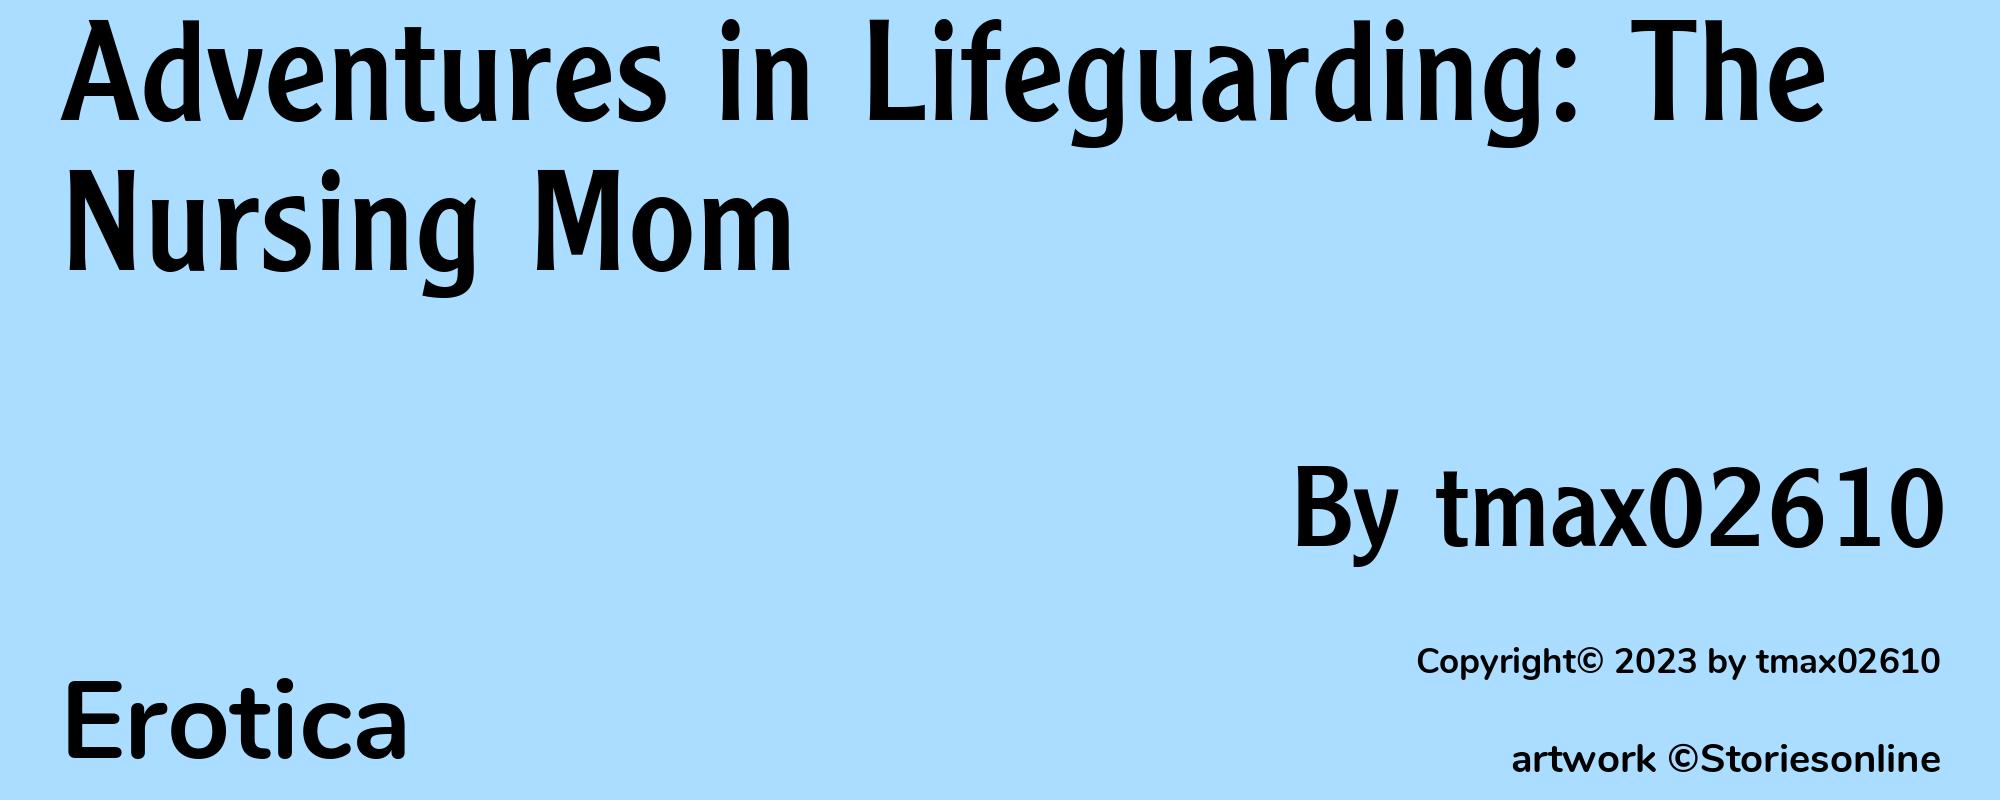 Adventures in Lifeguarding: The Nursing Mom - Cover